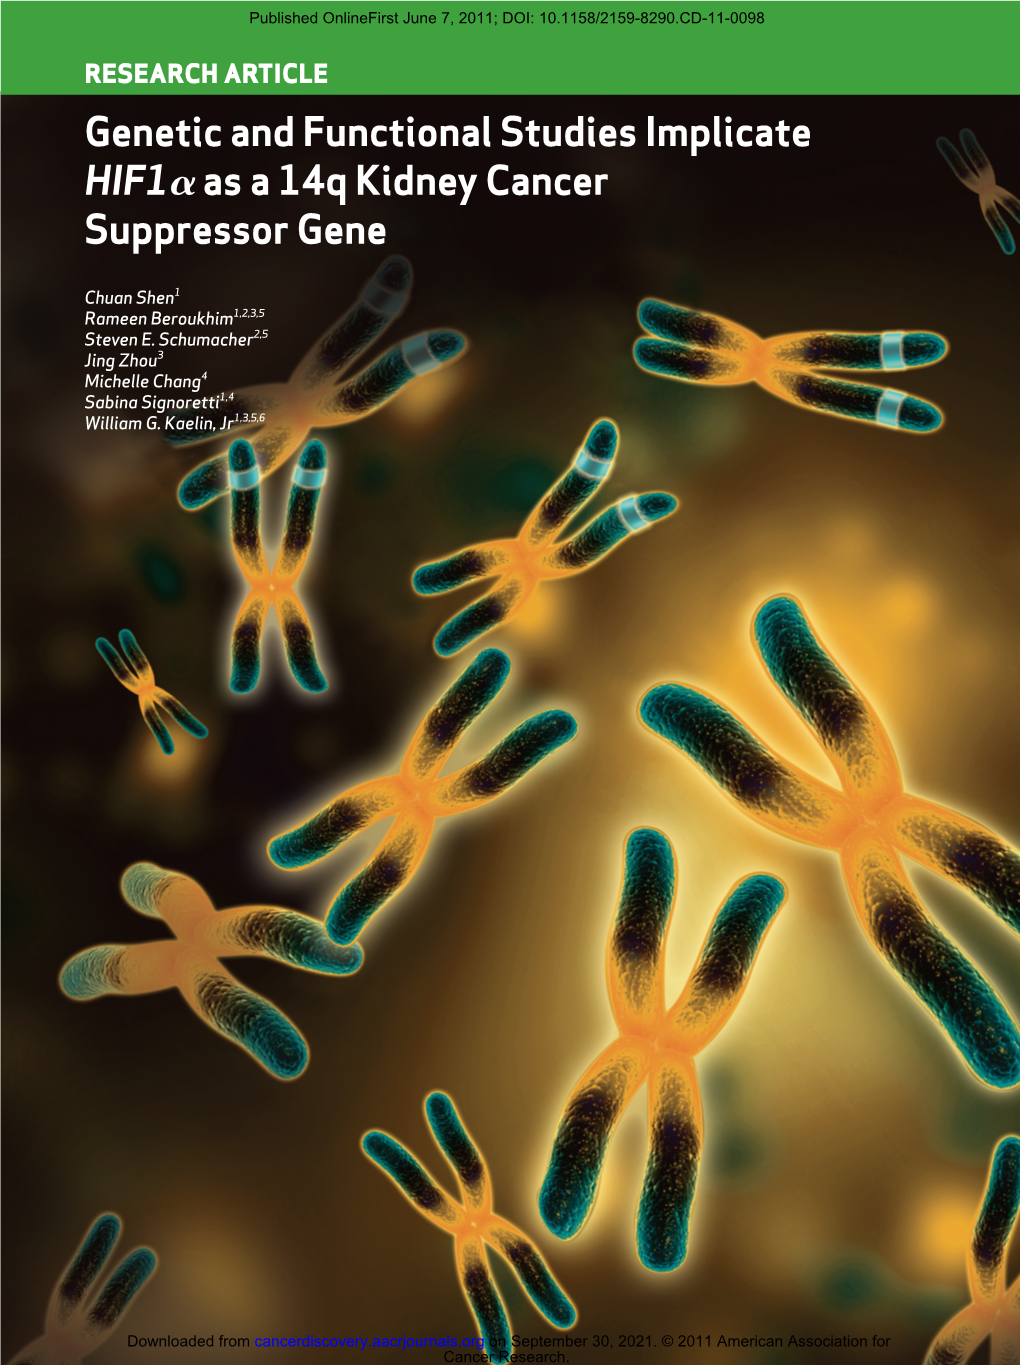 Genetic and Functional Studies Implicate Hif1aas a 14Q Kidney Cancer Suppressor Gene